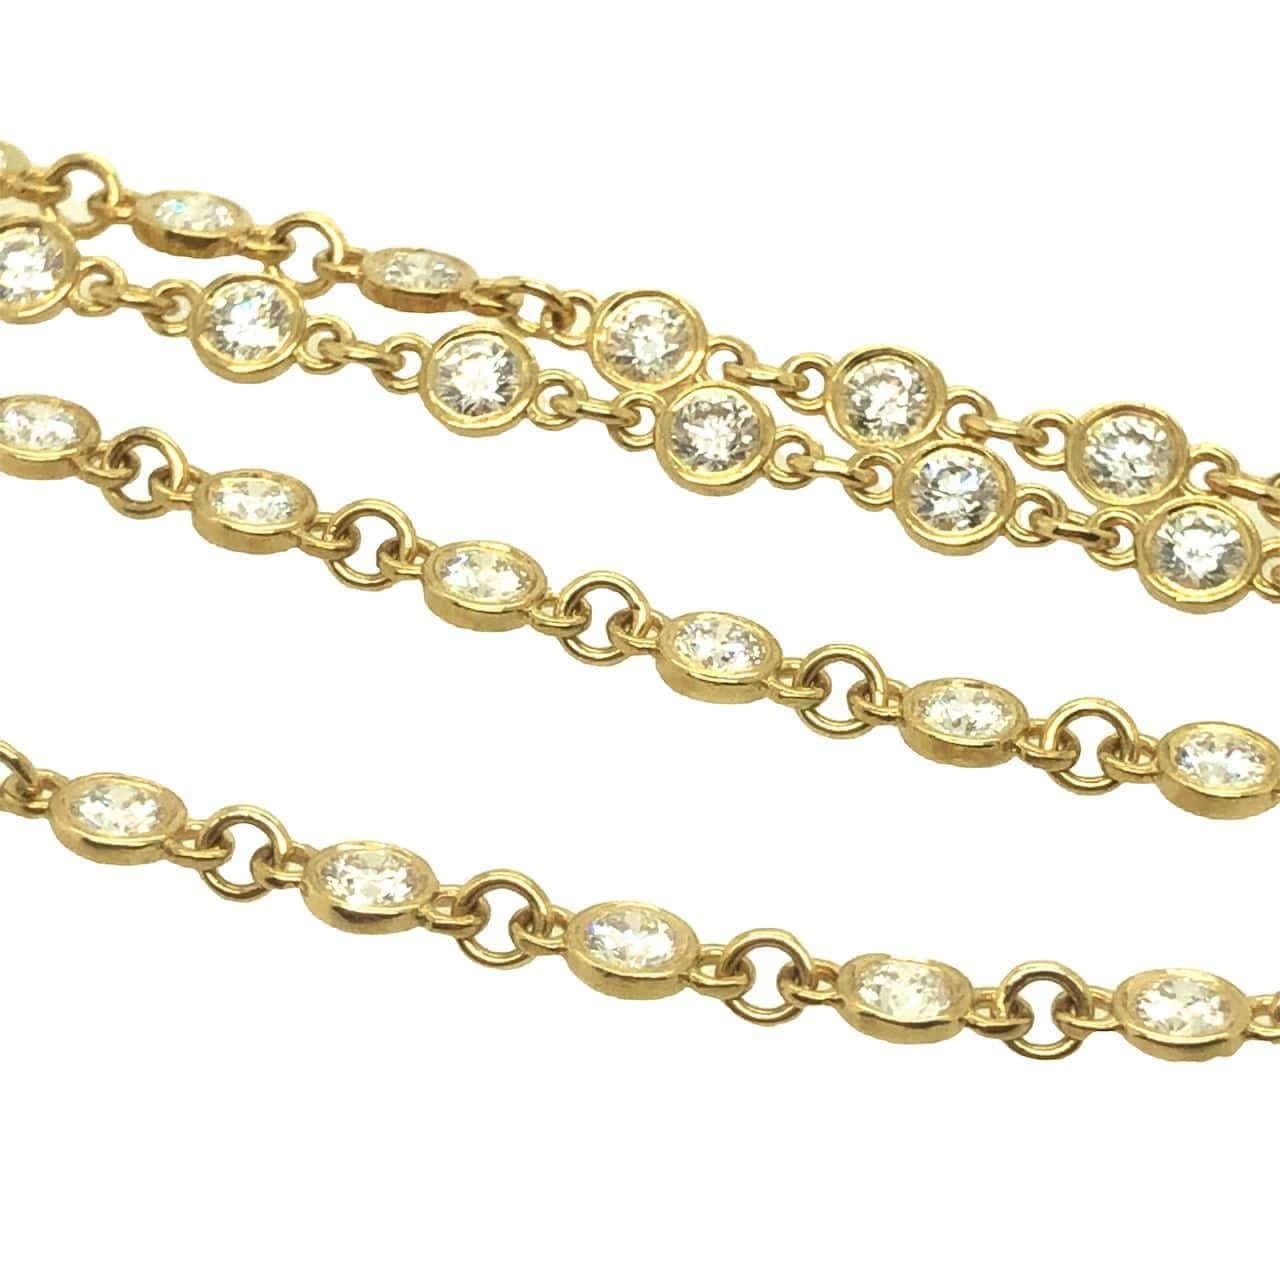 Round Cut Gems Are Forever 3.25 Ct. Diamond Link Chain Necklace 18K Yellow Gold For Sale